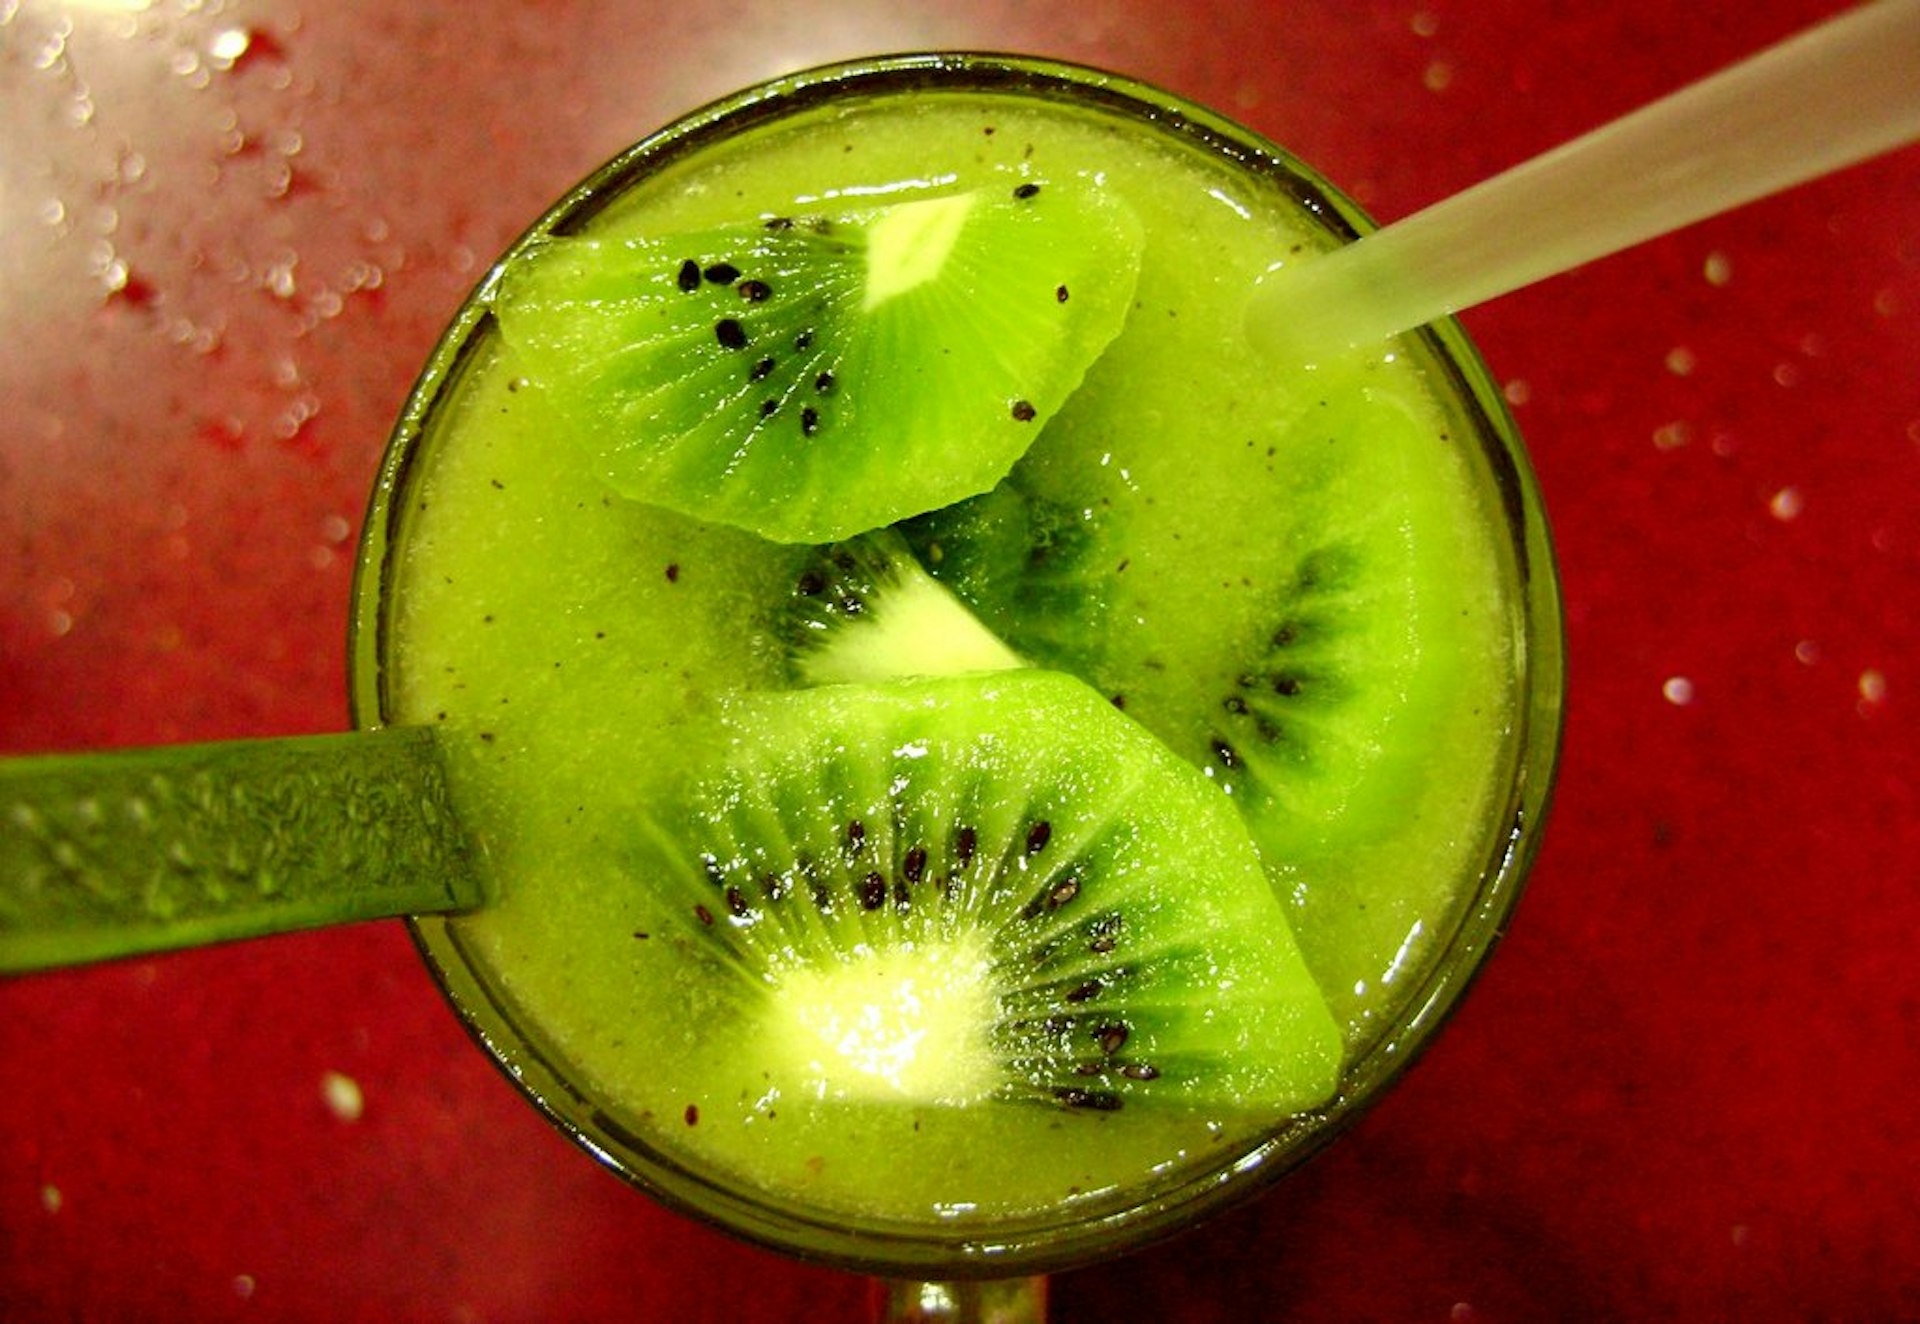 Kiwi smoothie to finish! Image by Tawheed Manzoor / CC by 2.0